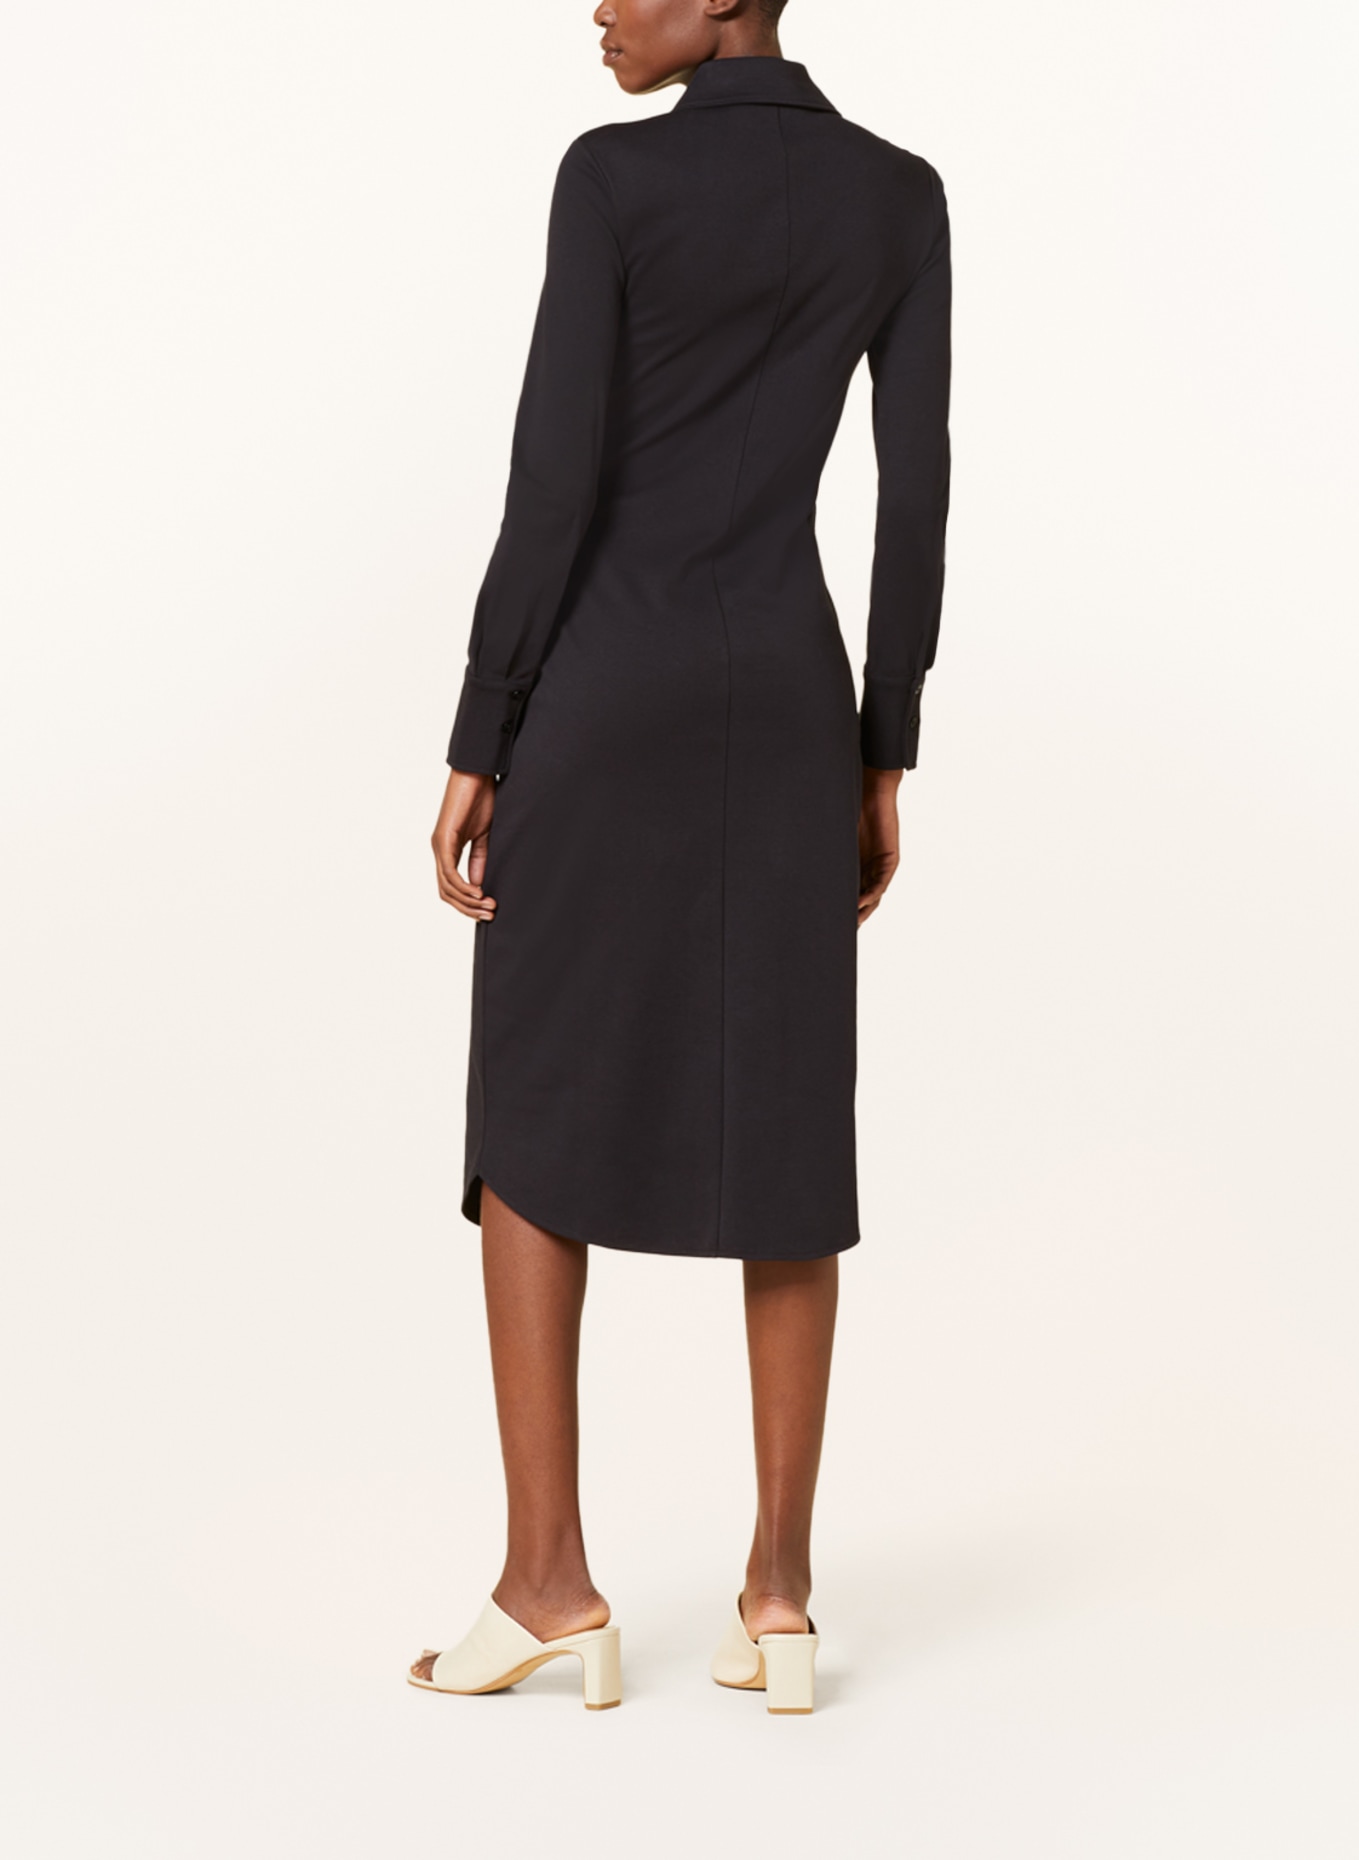 CLOSED Shirt dress made of jersey, Color: BLACK (Image 3)